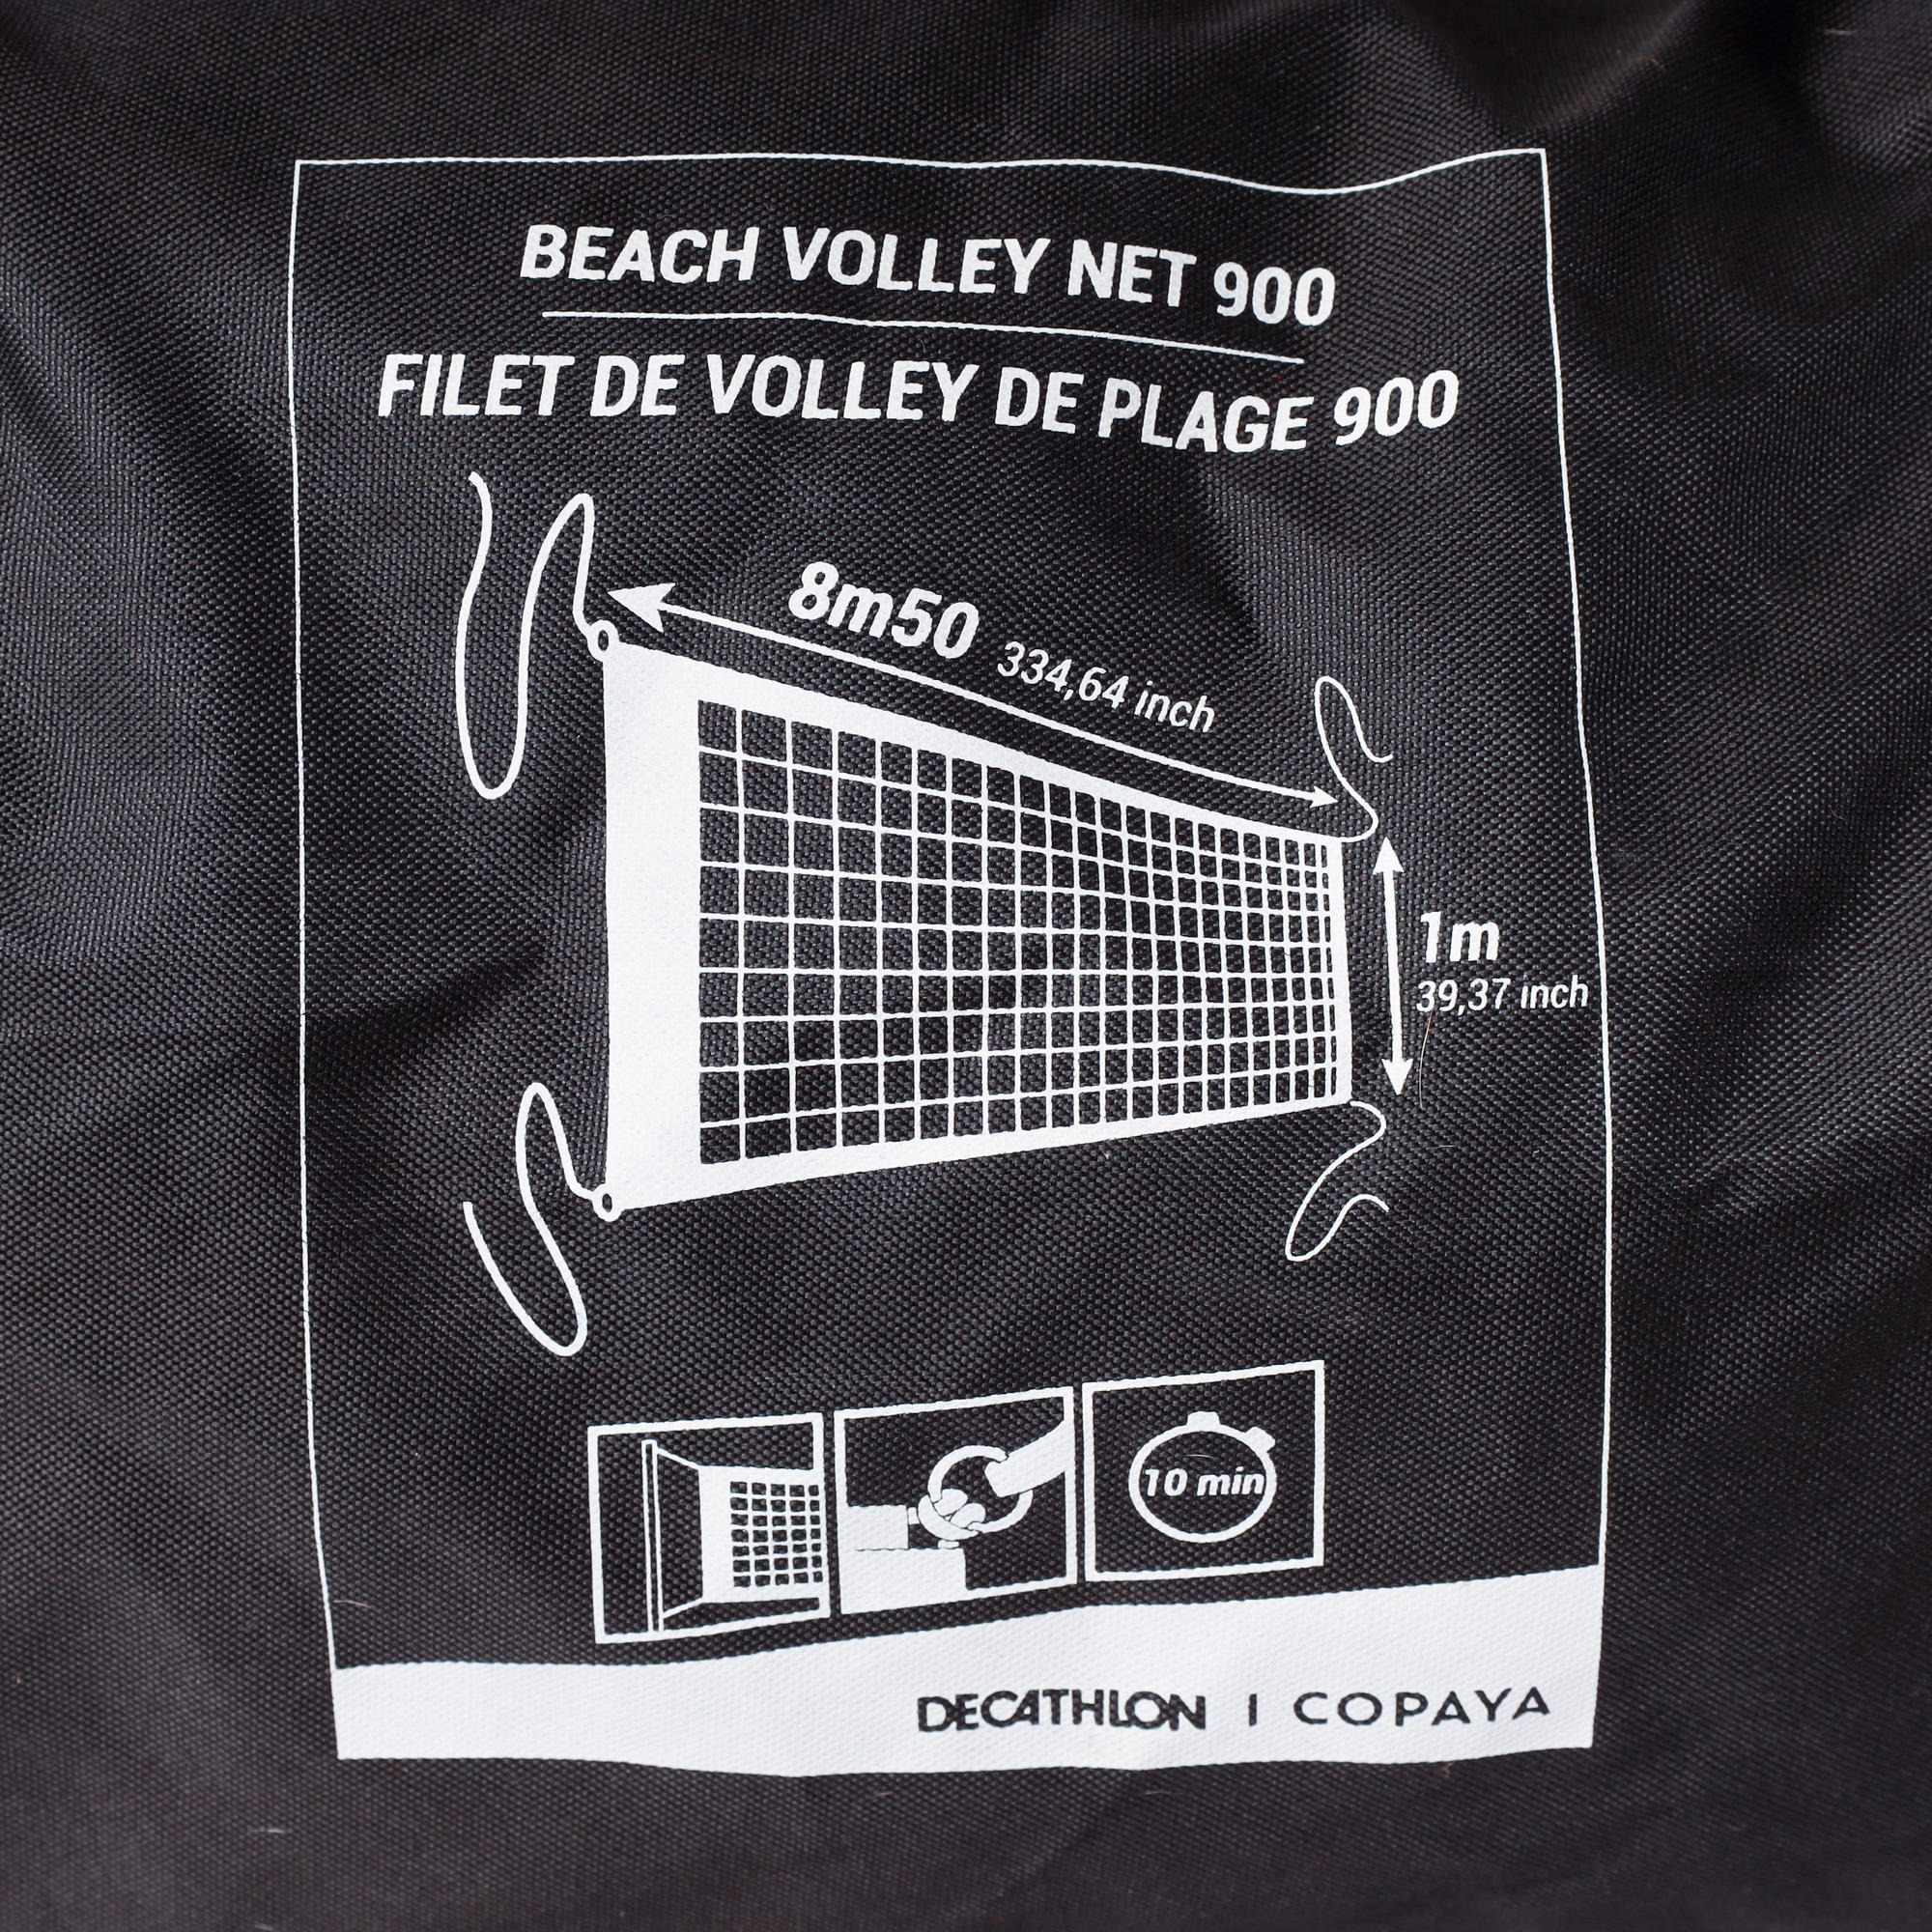 Beach Volleyball Net with Official Dimensions BVN900 3/12